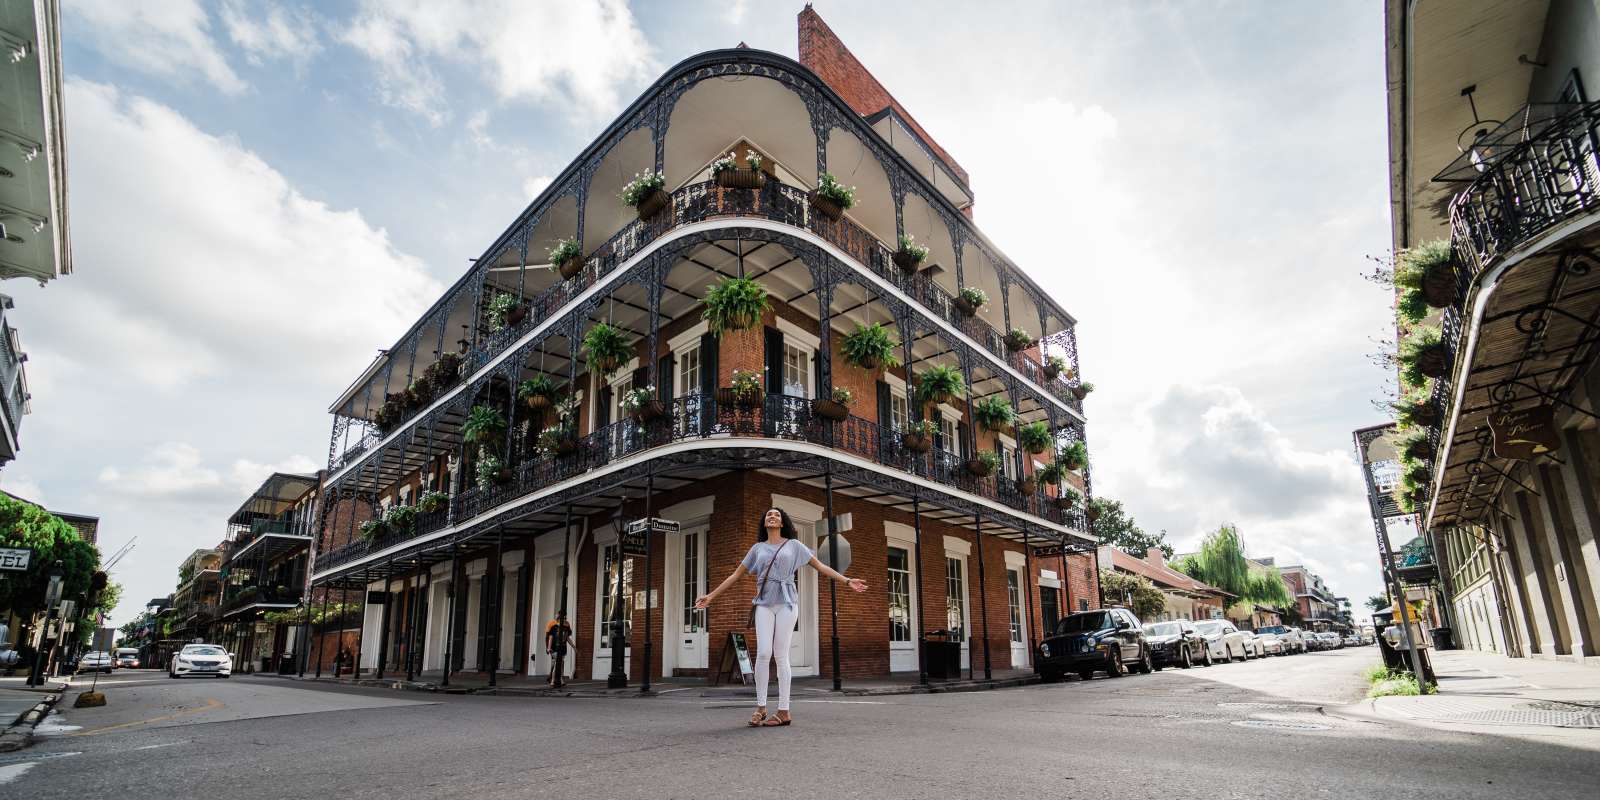 Exploring Royal Street in the French Quarter